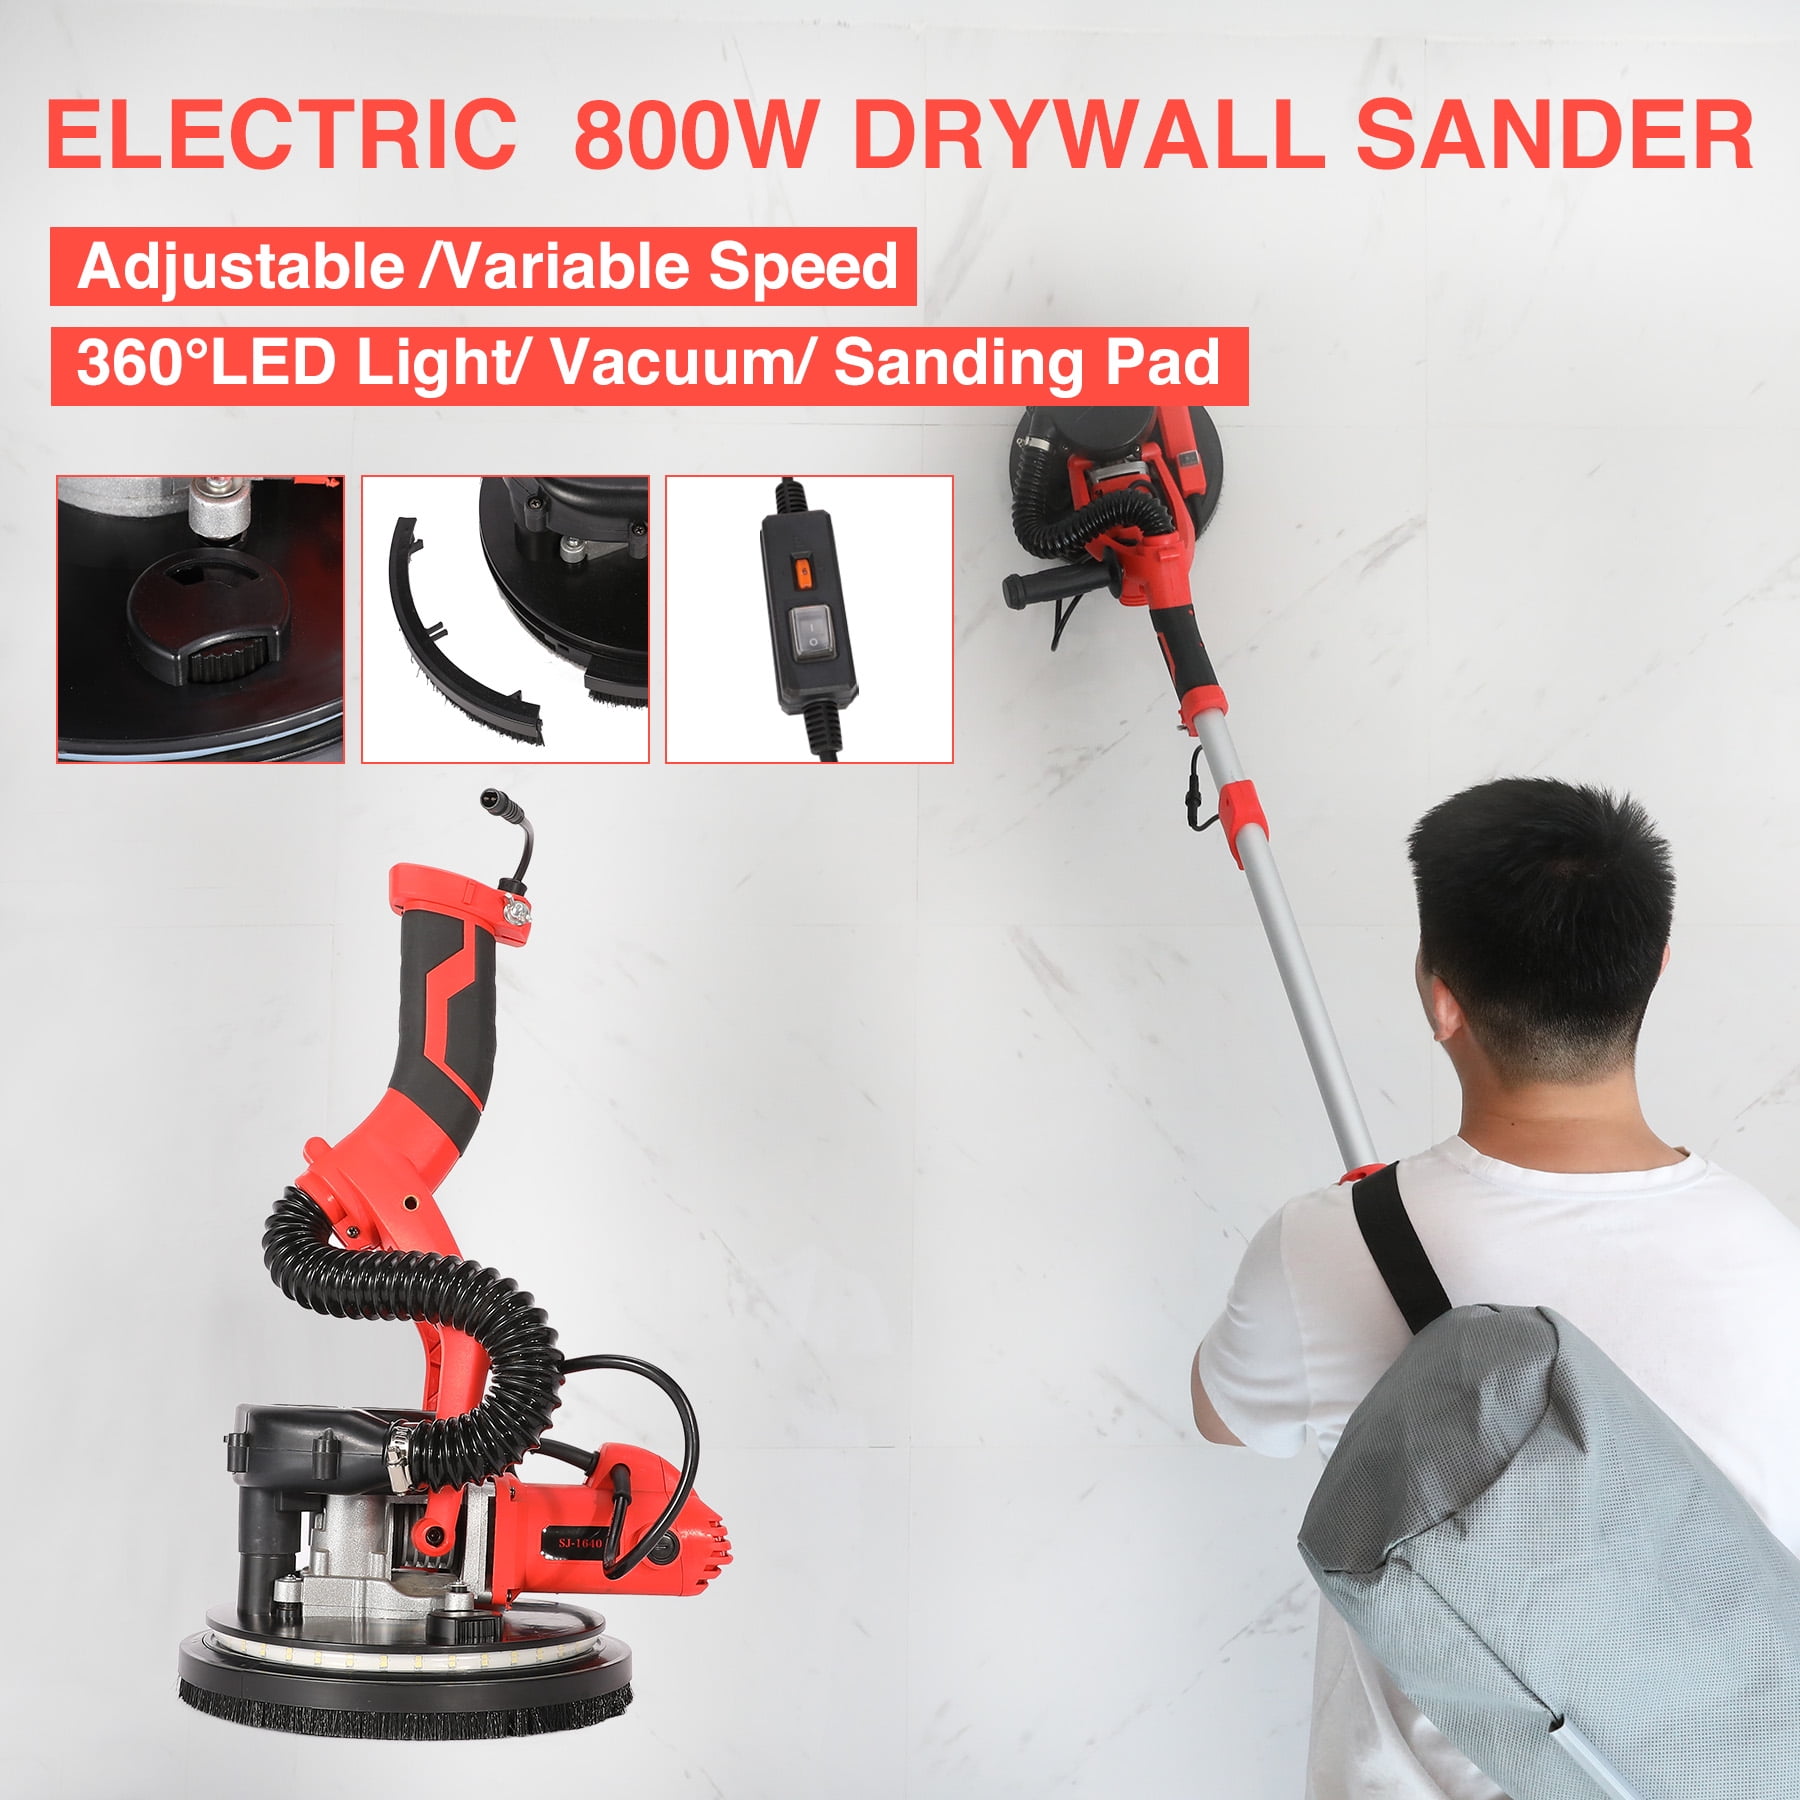 New Electric Drywall Sander Adjustable Variable Speed With Sanding Pad 800W 